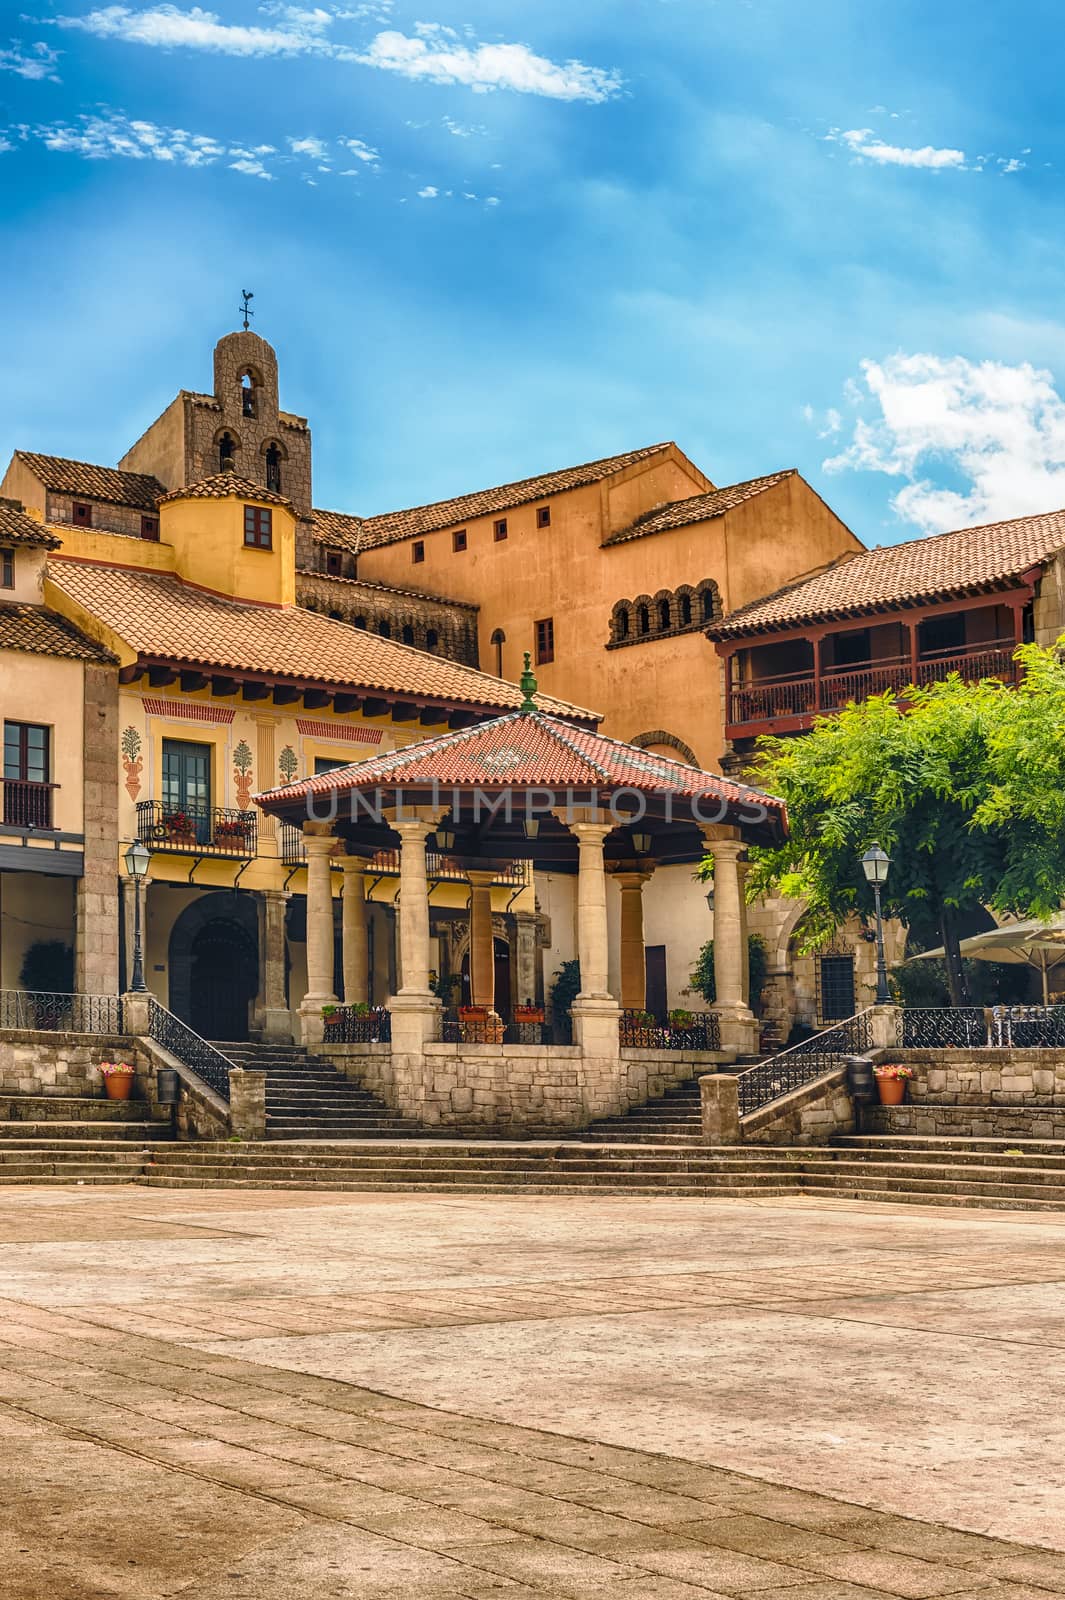 Plaza Mayor, main square in Poble Espanyol, an open-air architectural museum on the Montjuic hill in Barcelona, Catalonia, Spain